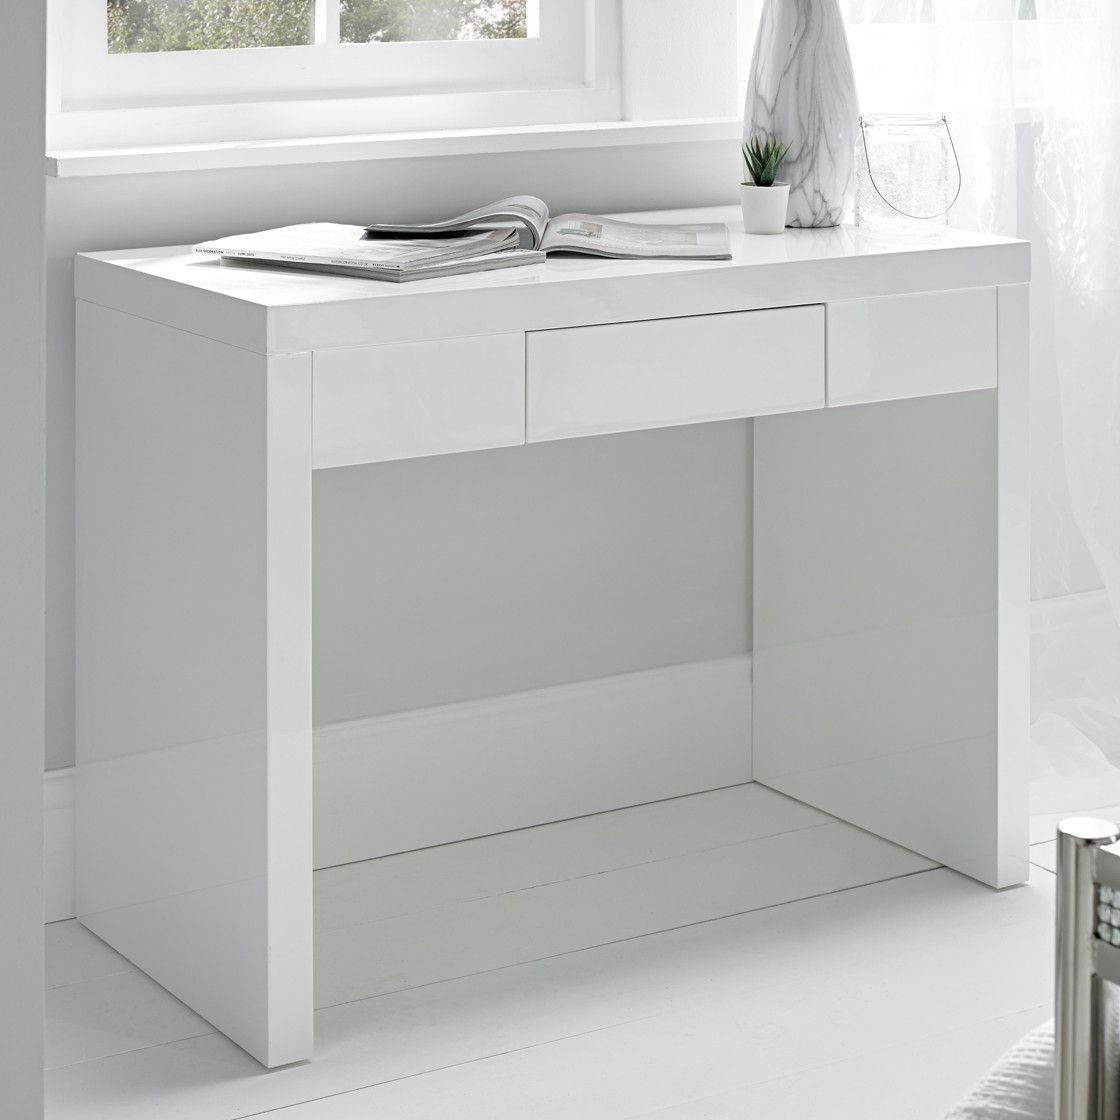 Puro Dressing Table White – Dressing Tables – Bedroom In Puro White Tv Stands (View 9 of 15)